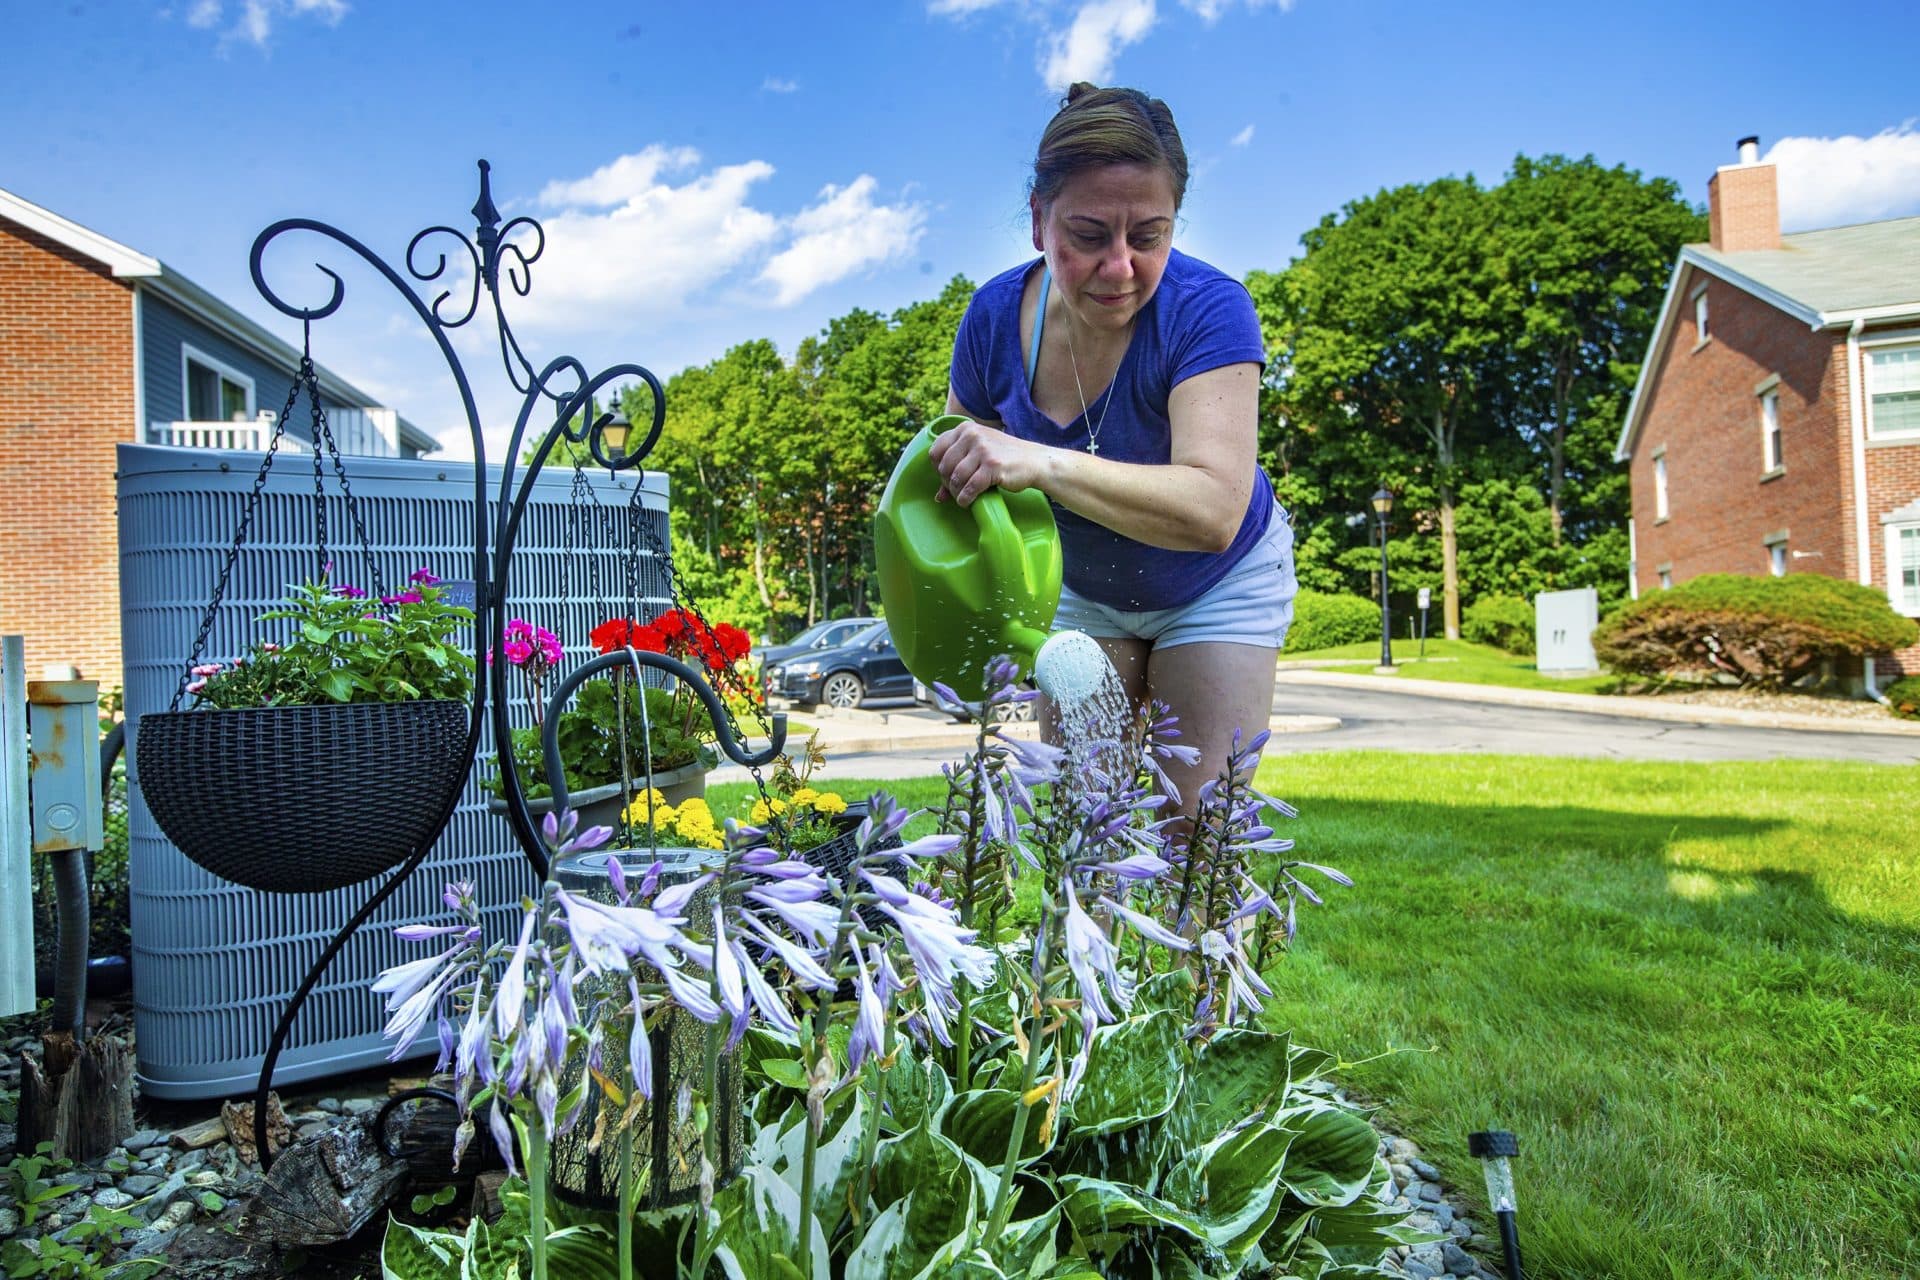 Susana Carella waters the small garden she manages at her Chelsea townhouse. (Jesse Costa/WBUR)